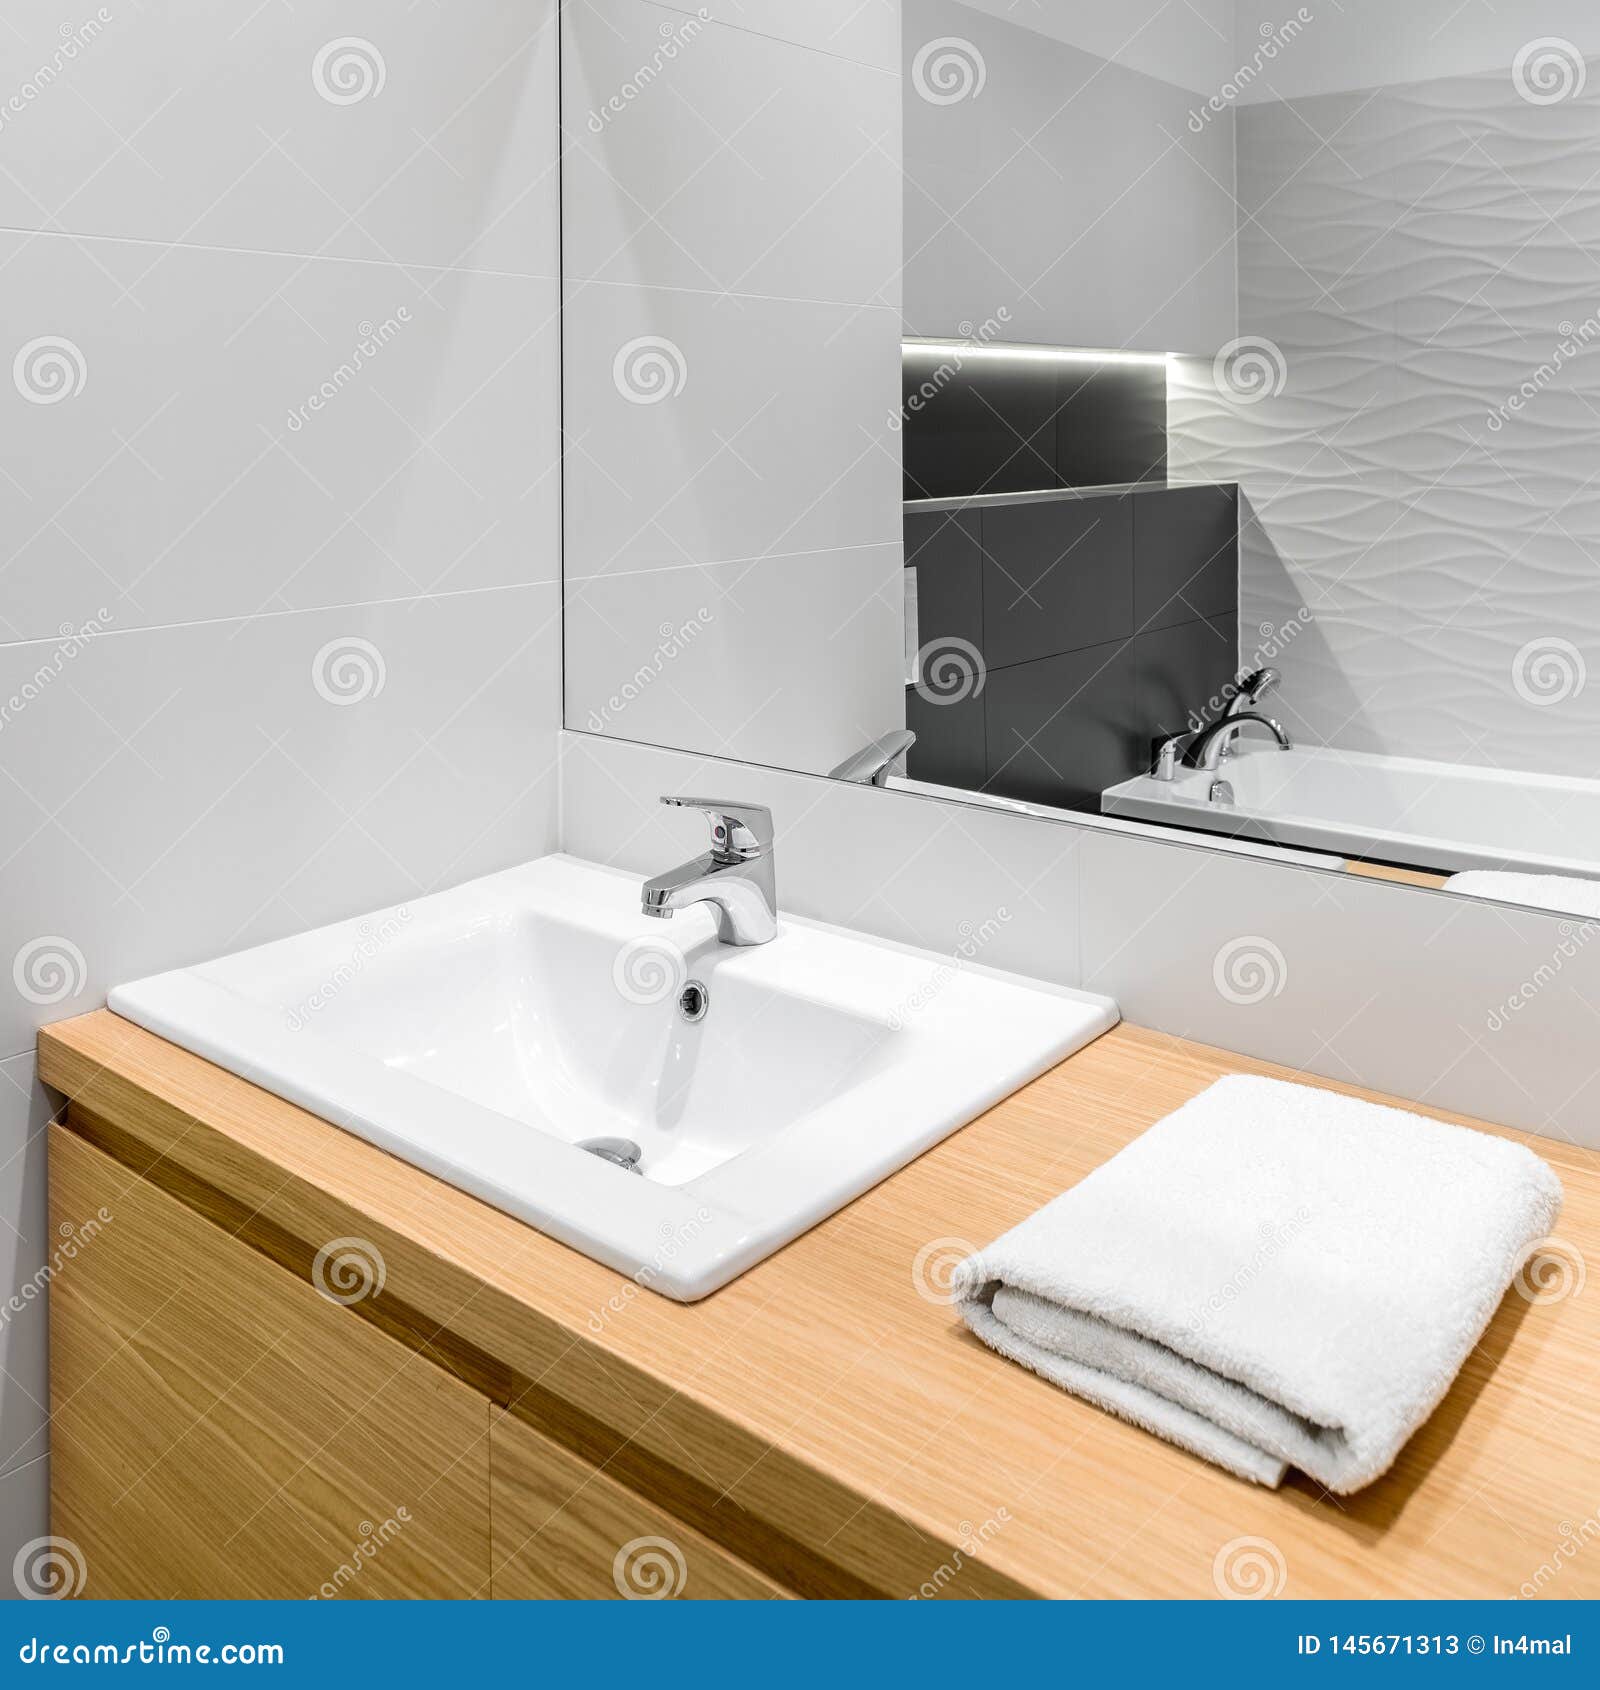 New Bathroom With Wooden Cabinet Stock Image Image Of Faucet